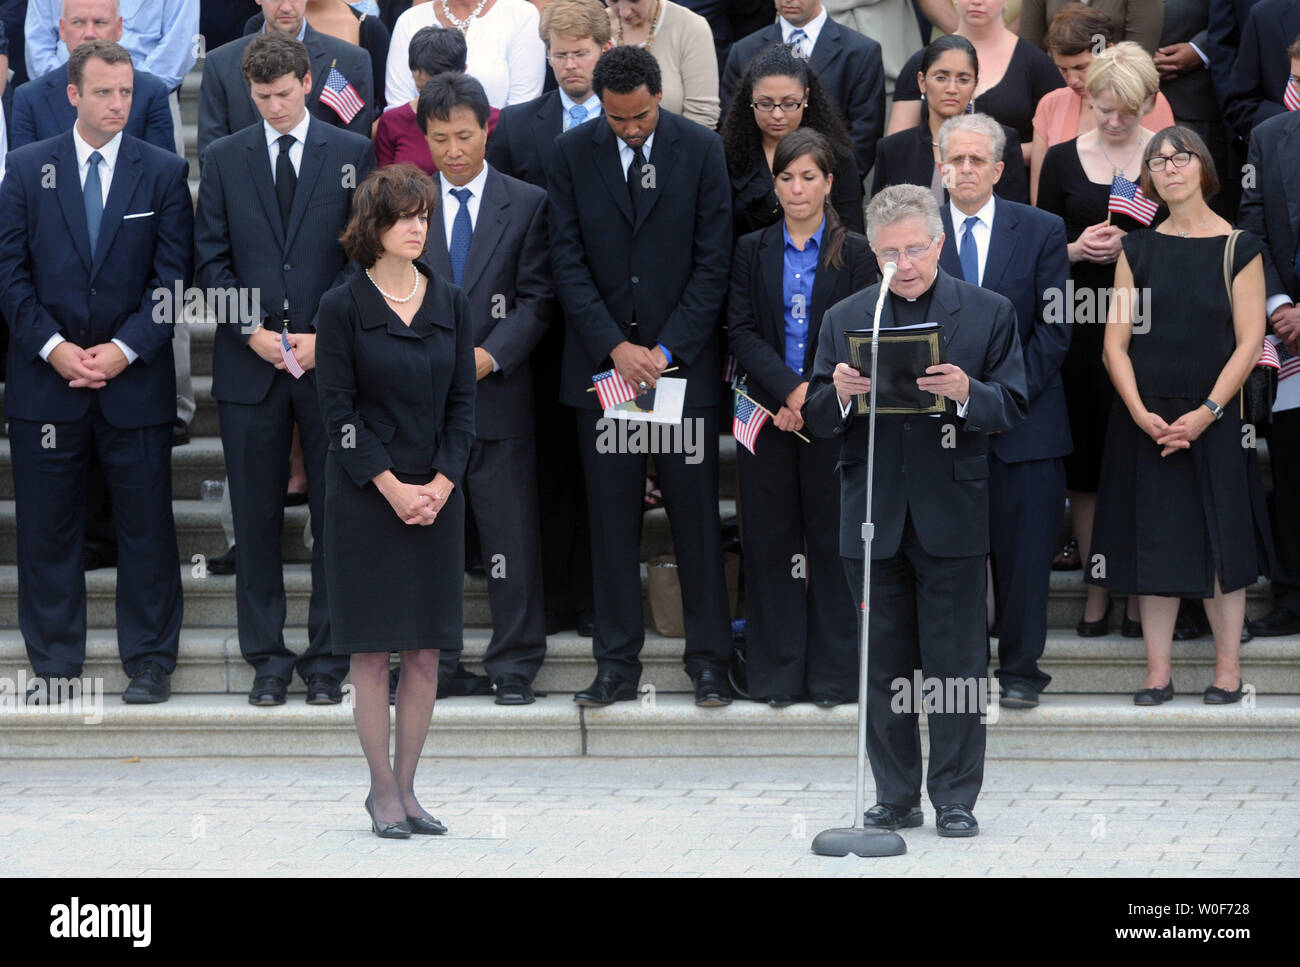 Reverend Daniel P. Coughlin (R), Chaplain of the U.S. House of Representatives, says a prayer while widow of Senator Edward Kennedy, Vicki Kennedy (L) and members of Congress and former and current staff members of the Senator listens, outside the U.S. Capitol building in Washington on August 29, 2009. Senator Kennedy, who passed away August 25 at the age of 77, will be buried  today at Arlington National Cemetery. UPI/Alexis C. Glenn Stock Photo